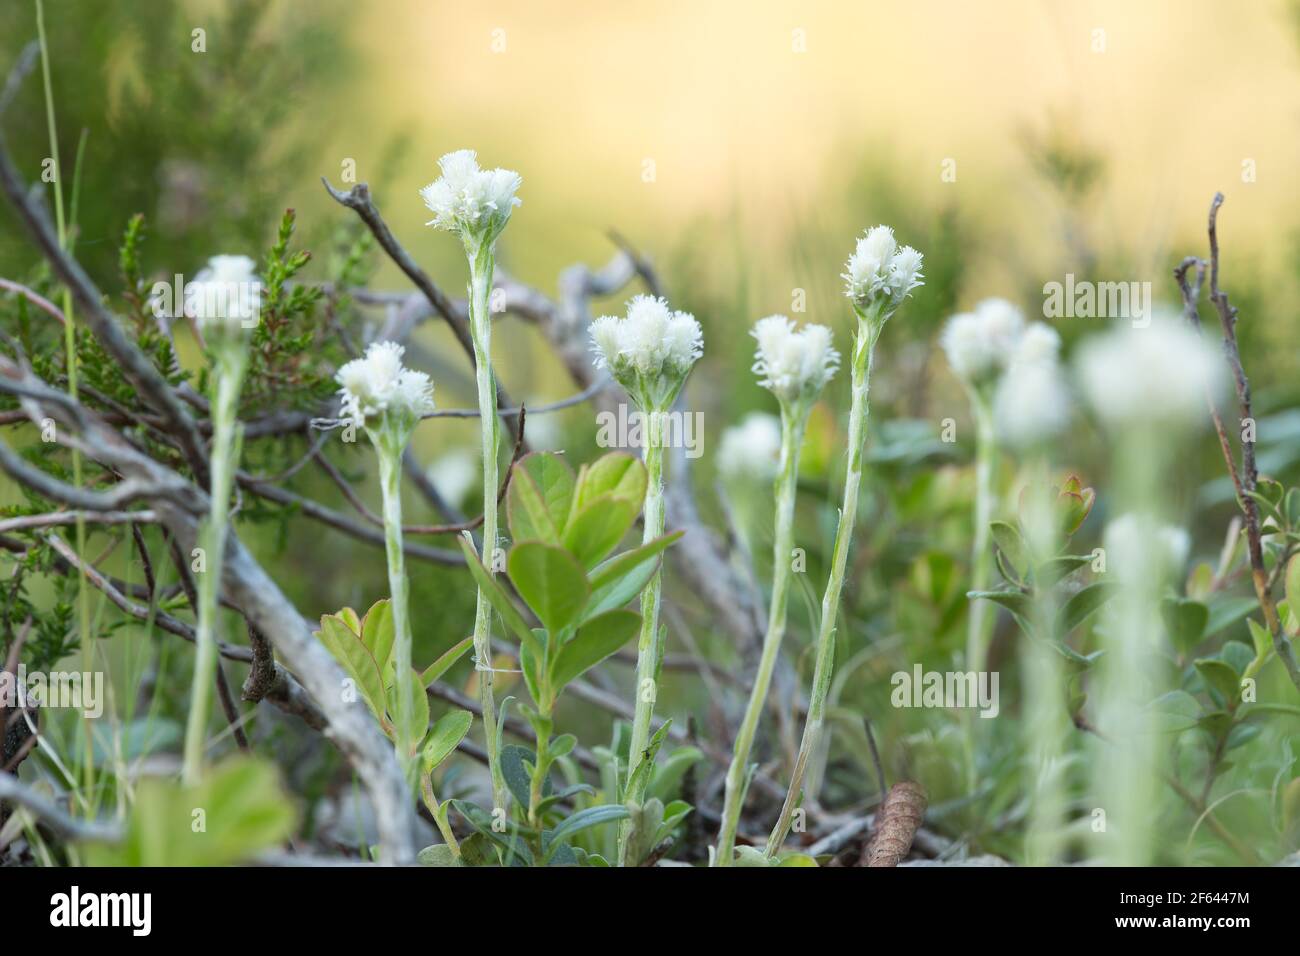 Blooming mountain everlasting, Antennaria dioica in dry environment Stock Photo